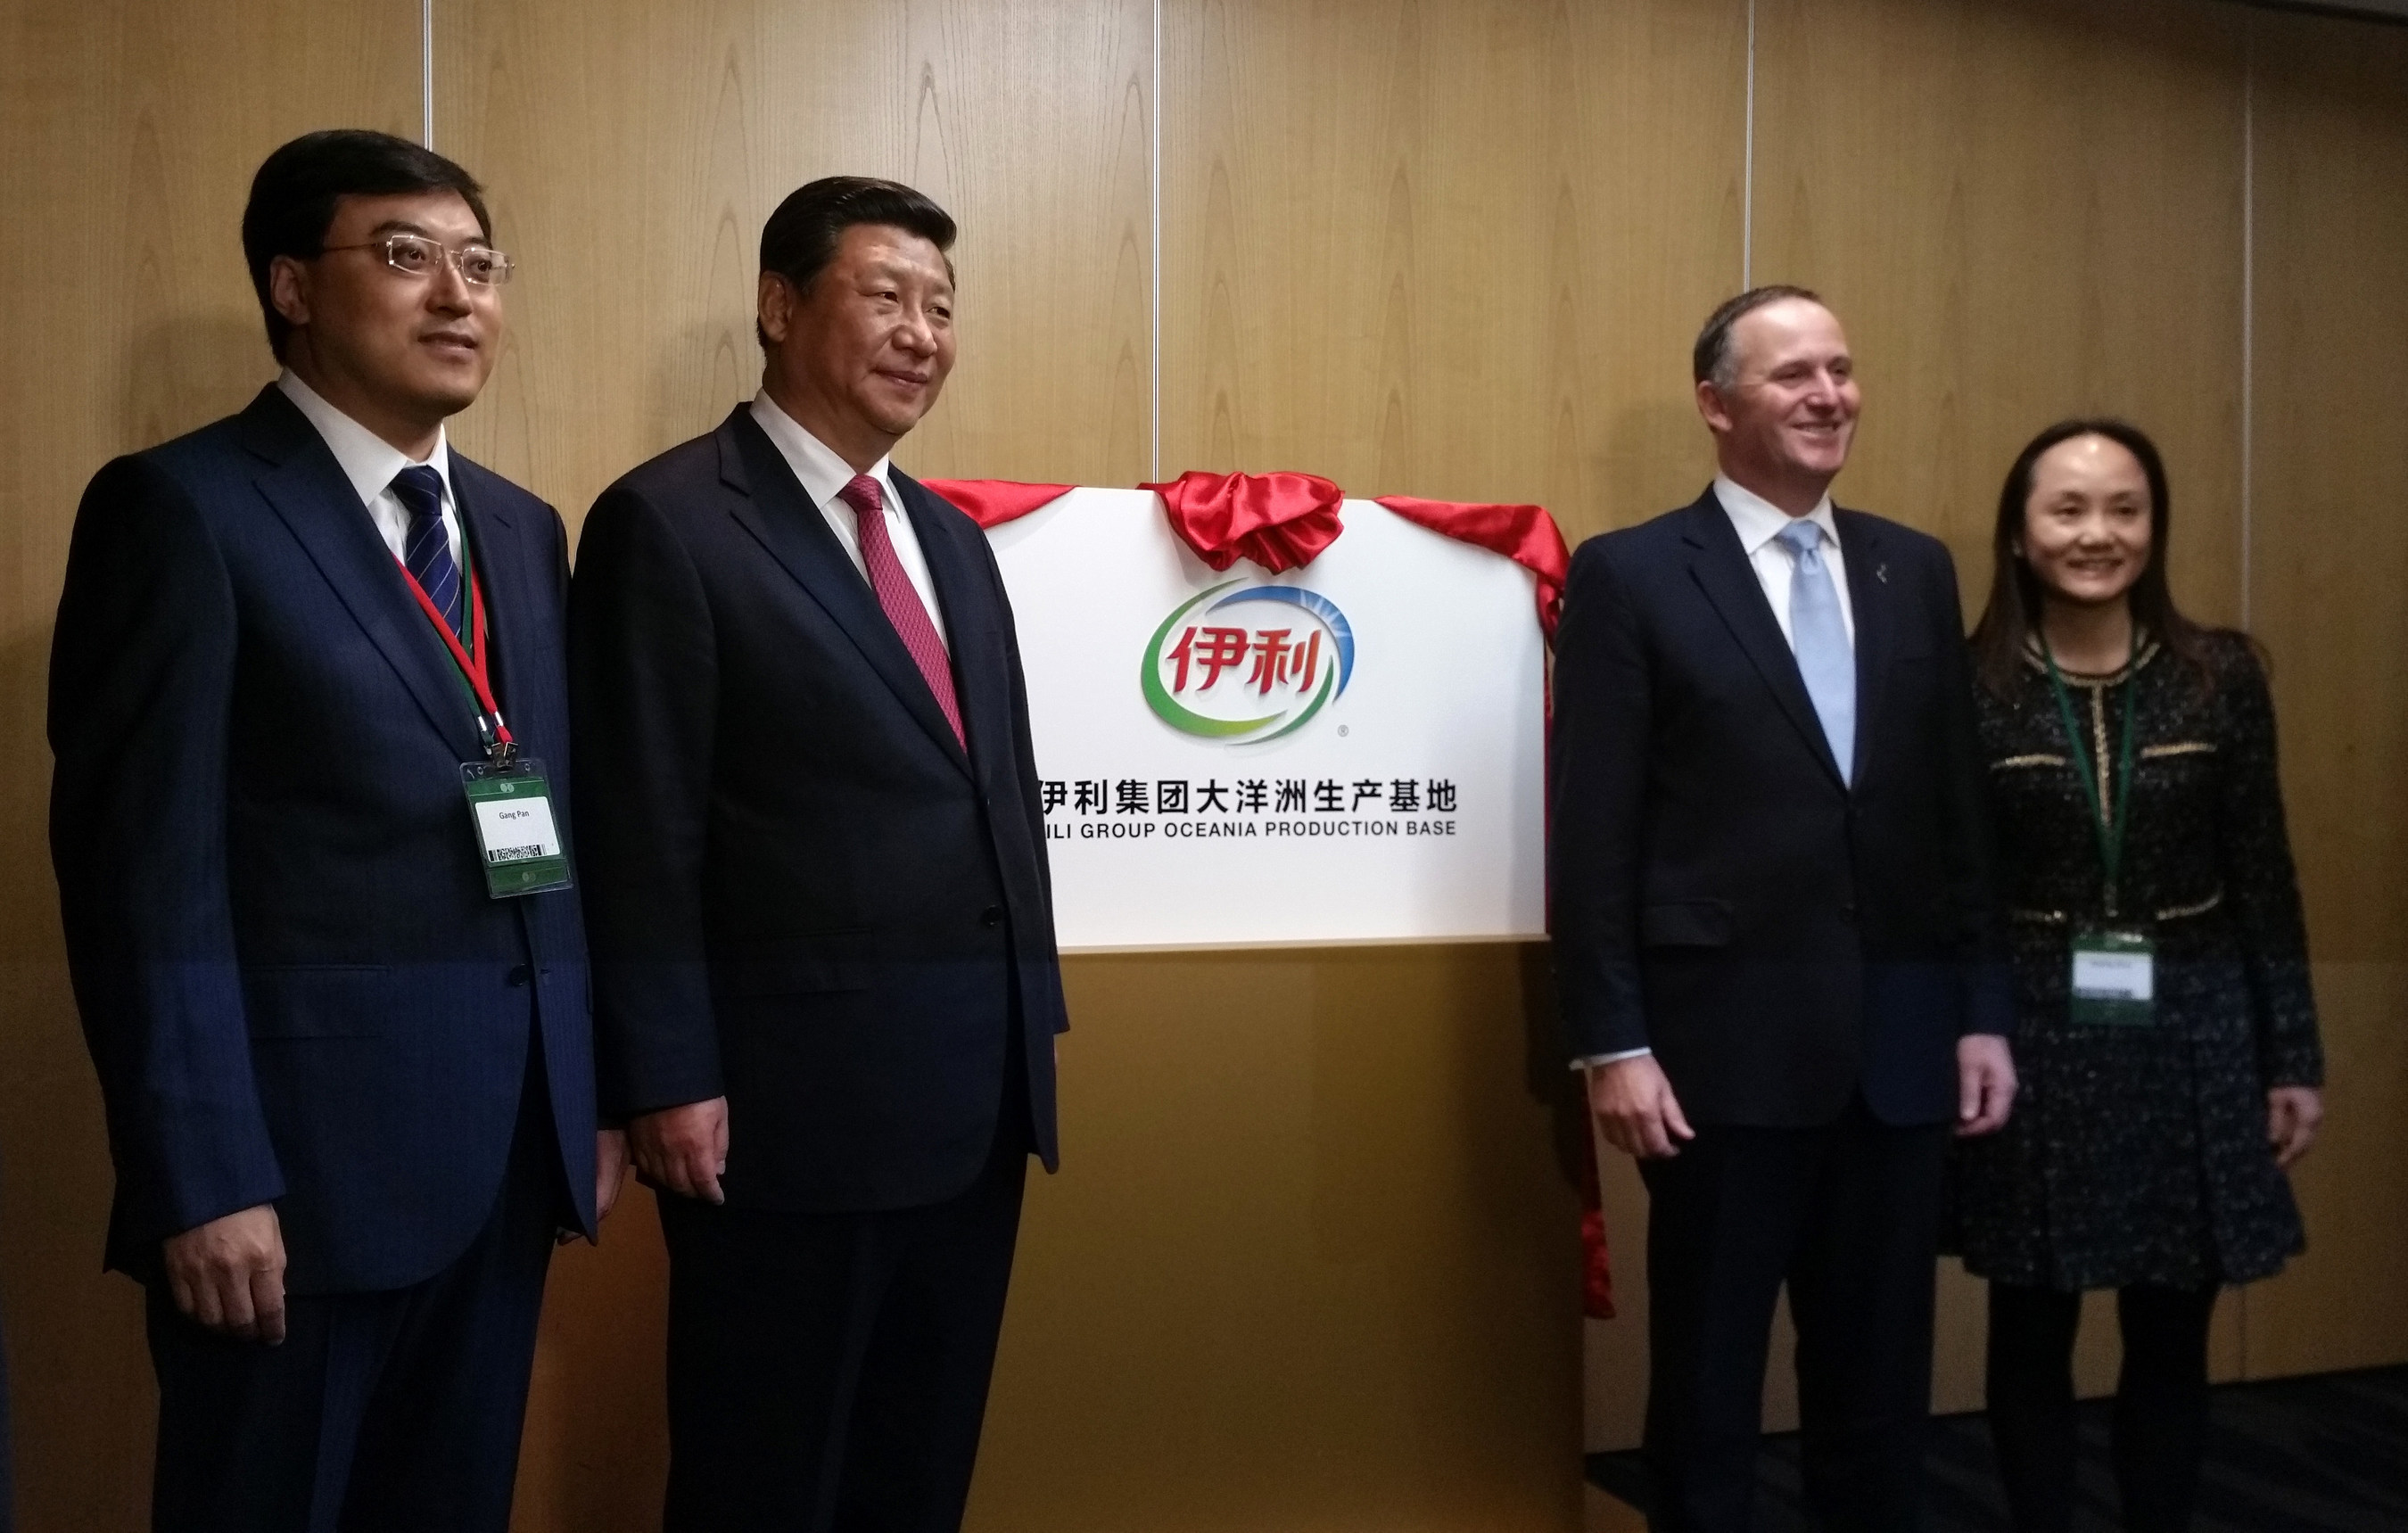 Chinese leaders and New Zealand Prime Minister John Key are unveiling Yili Group Oceania Production Base. After being briefed by Pan Gang, Chairman of Yili Group, President Xi personally introduced the Group to John Key